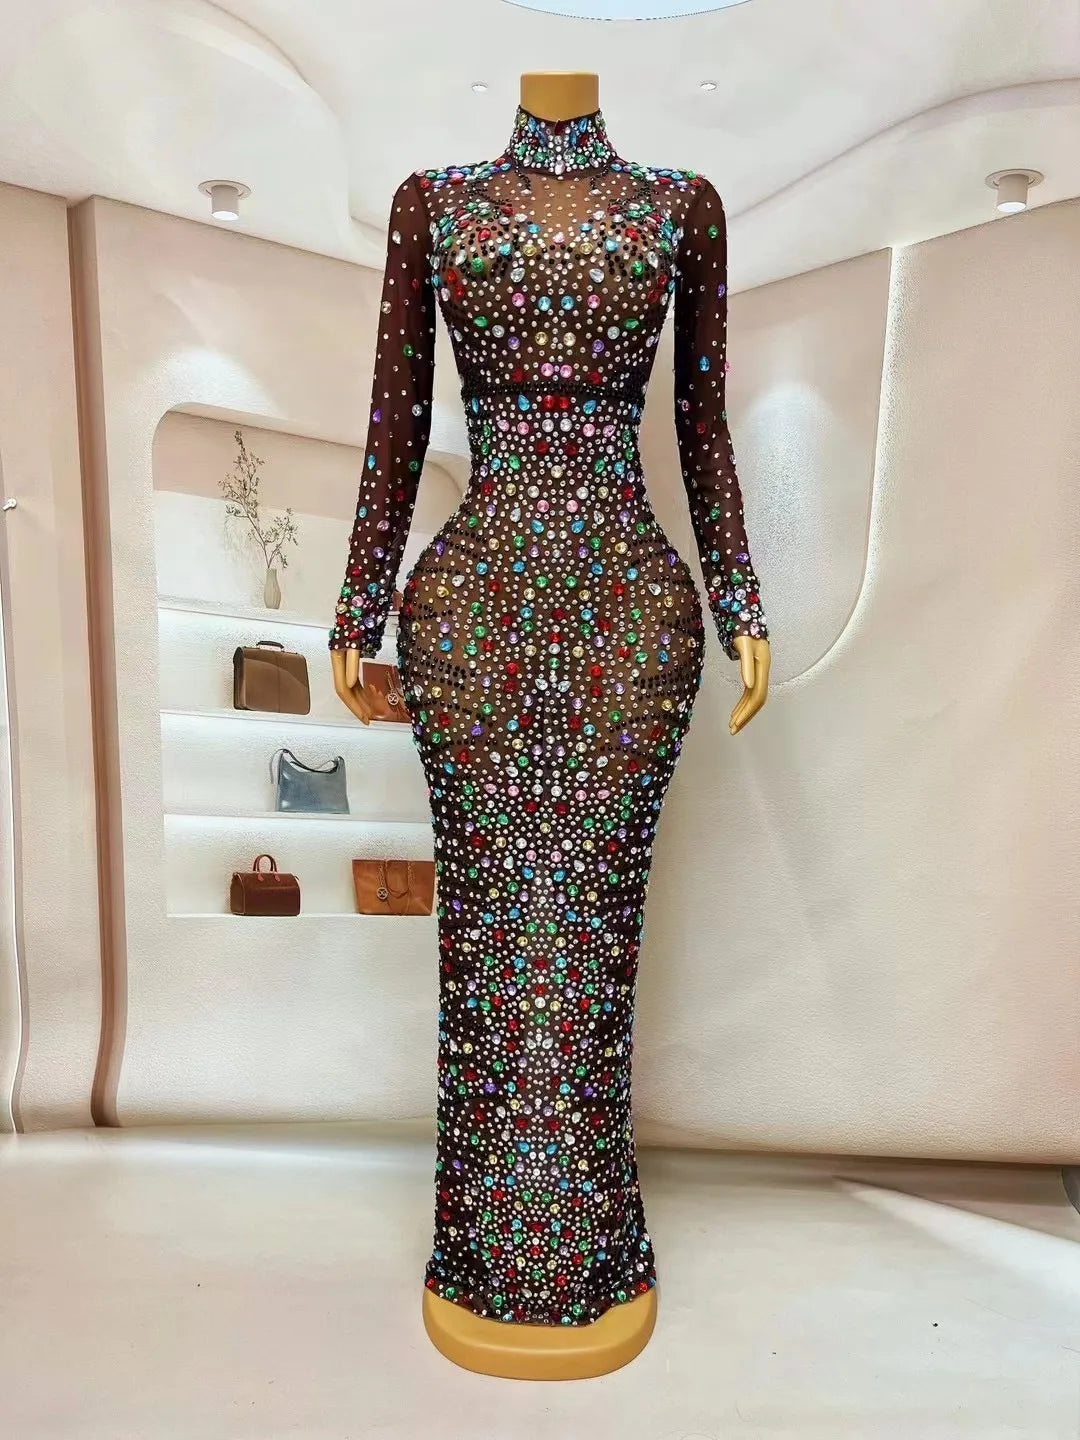 Sexy Sparkly Colorful Rhinestones Long Sleeves Dress luxurious Evening Brown Mesh Costume Party Celebrate Photo Shoot Dress